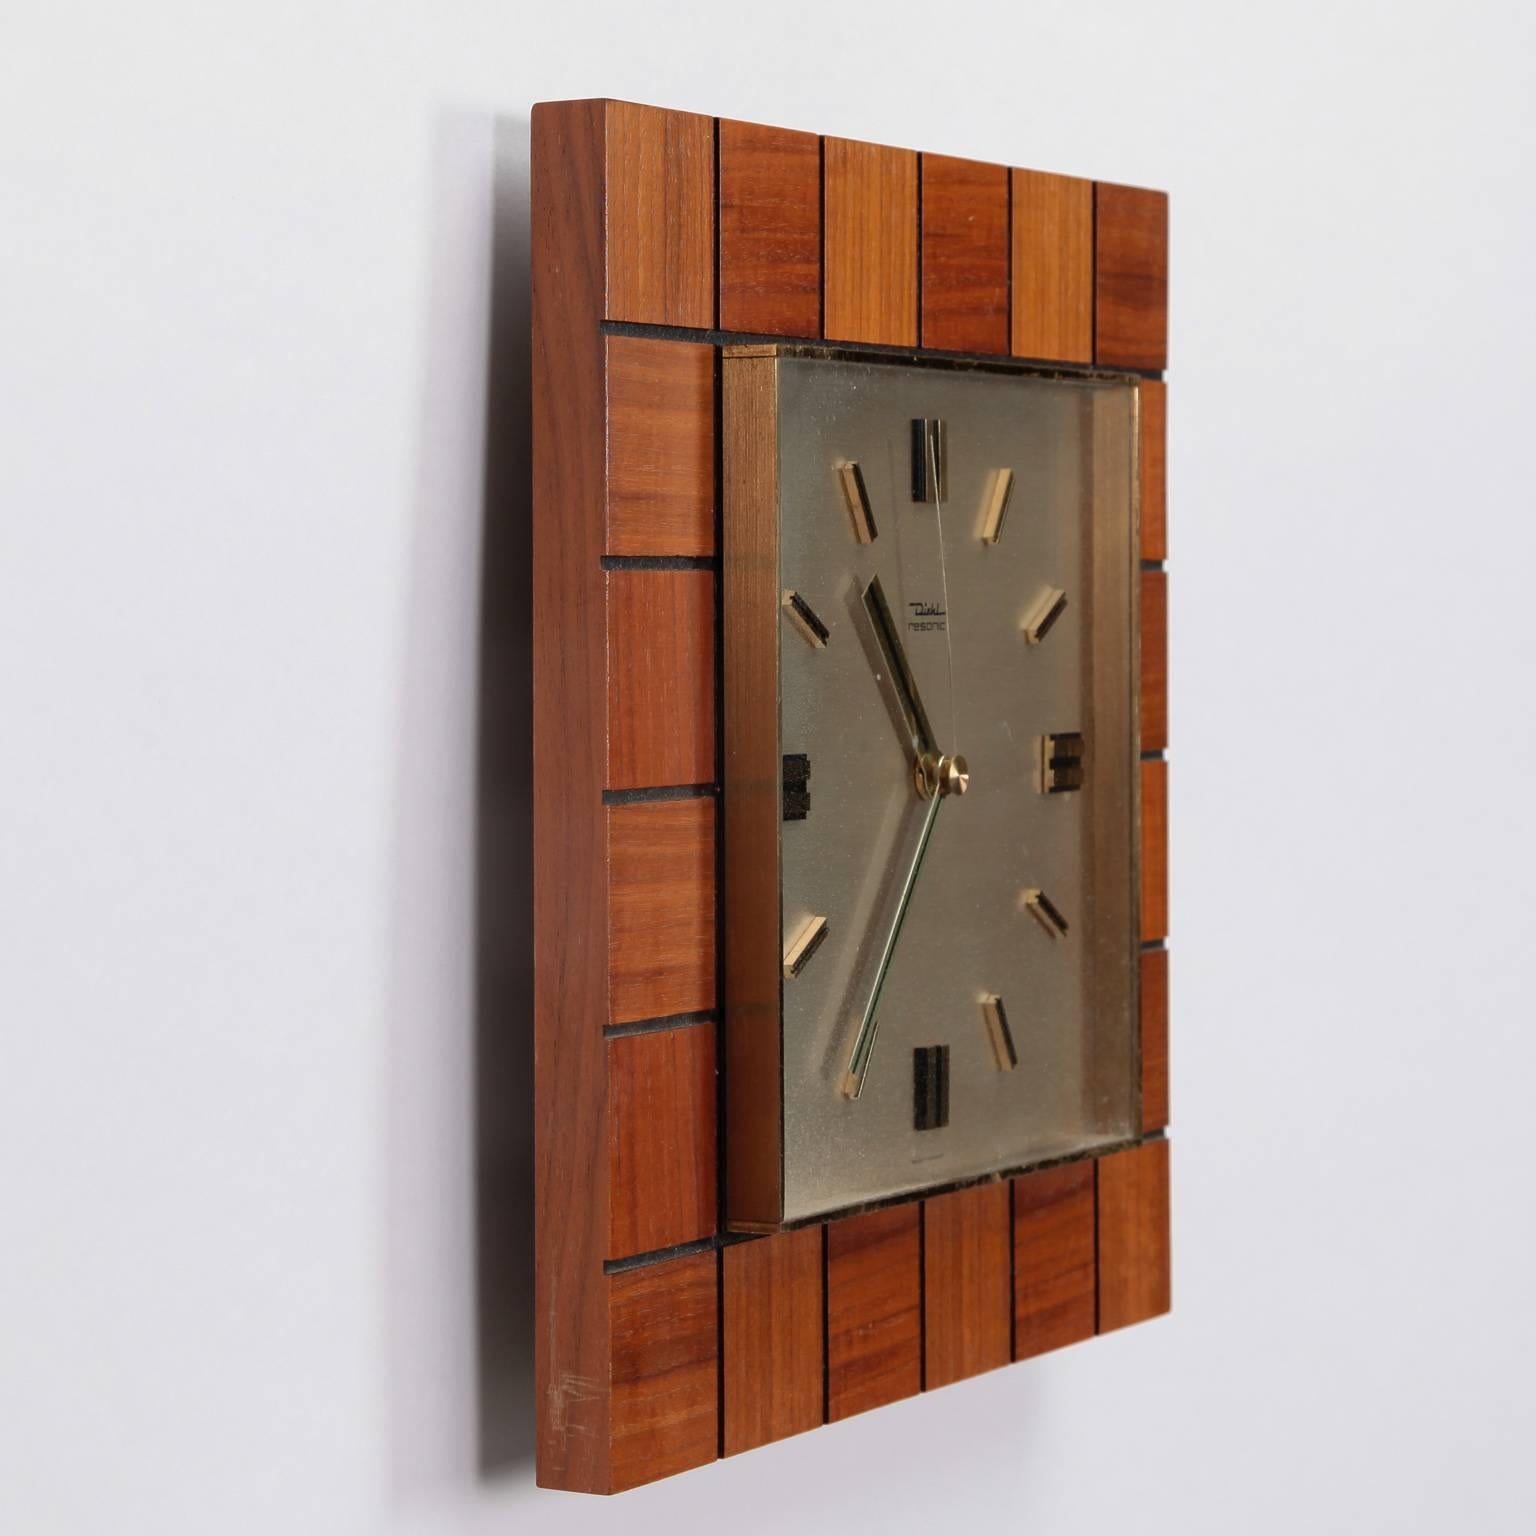 Square German battery operated wall clock by Diehl is framed with squares of teakwood surrounding the white clock face with Roman numerals, circa 1960s.